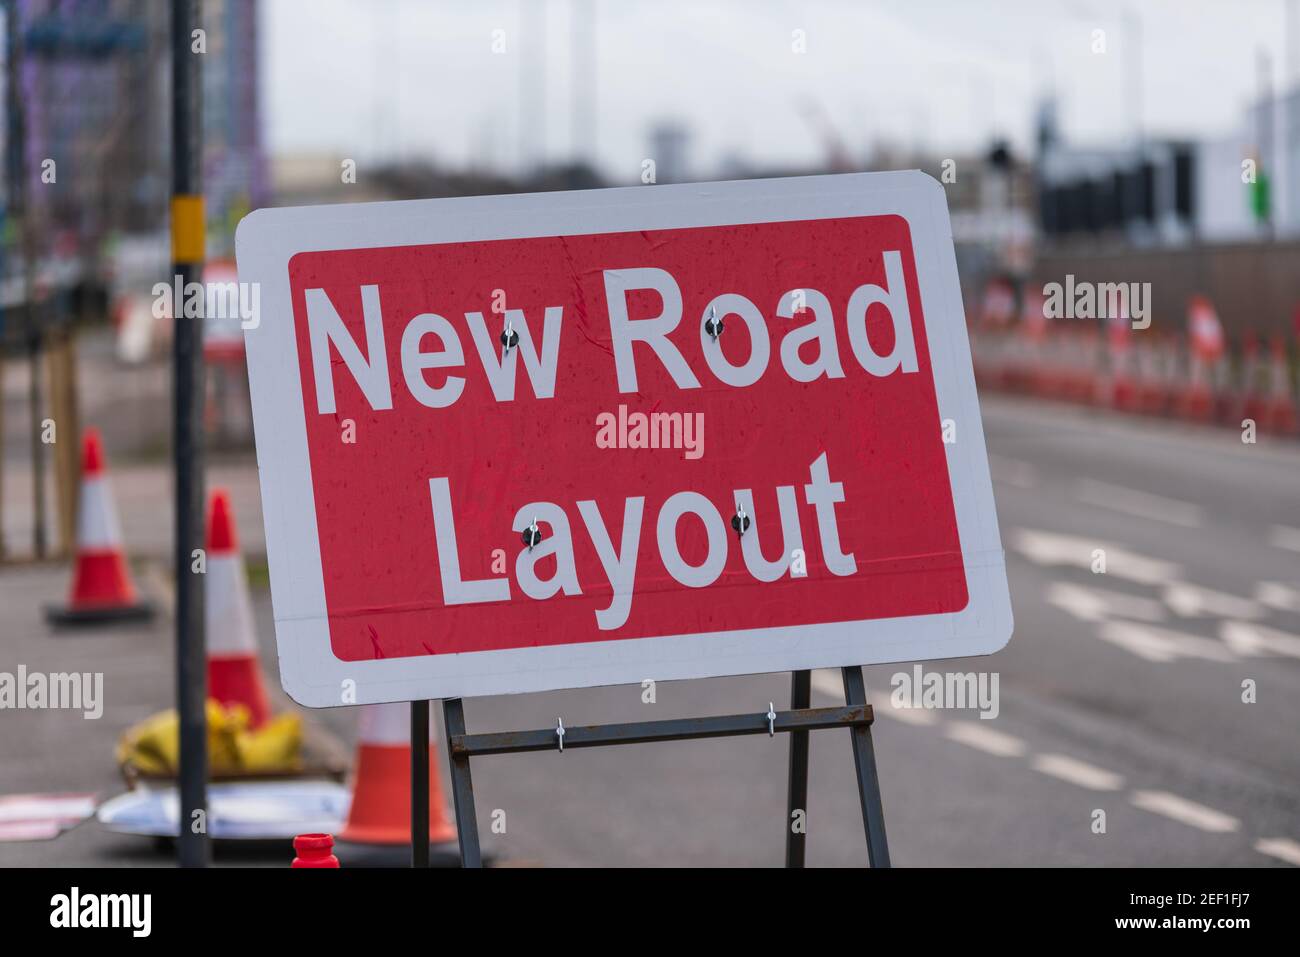 New Road Layout red traffic management sign, UK Stock Photo